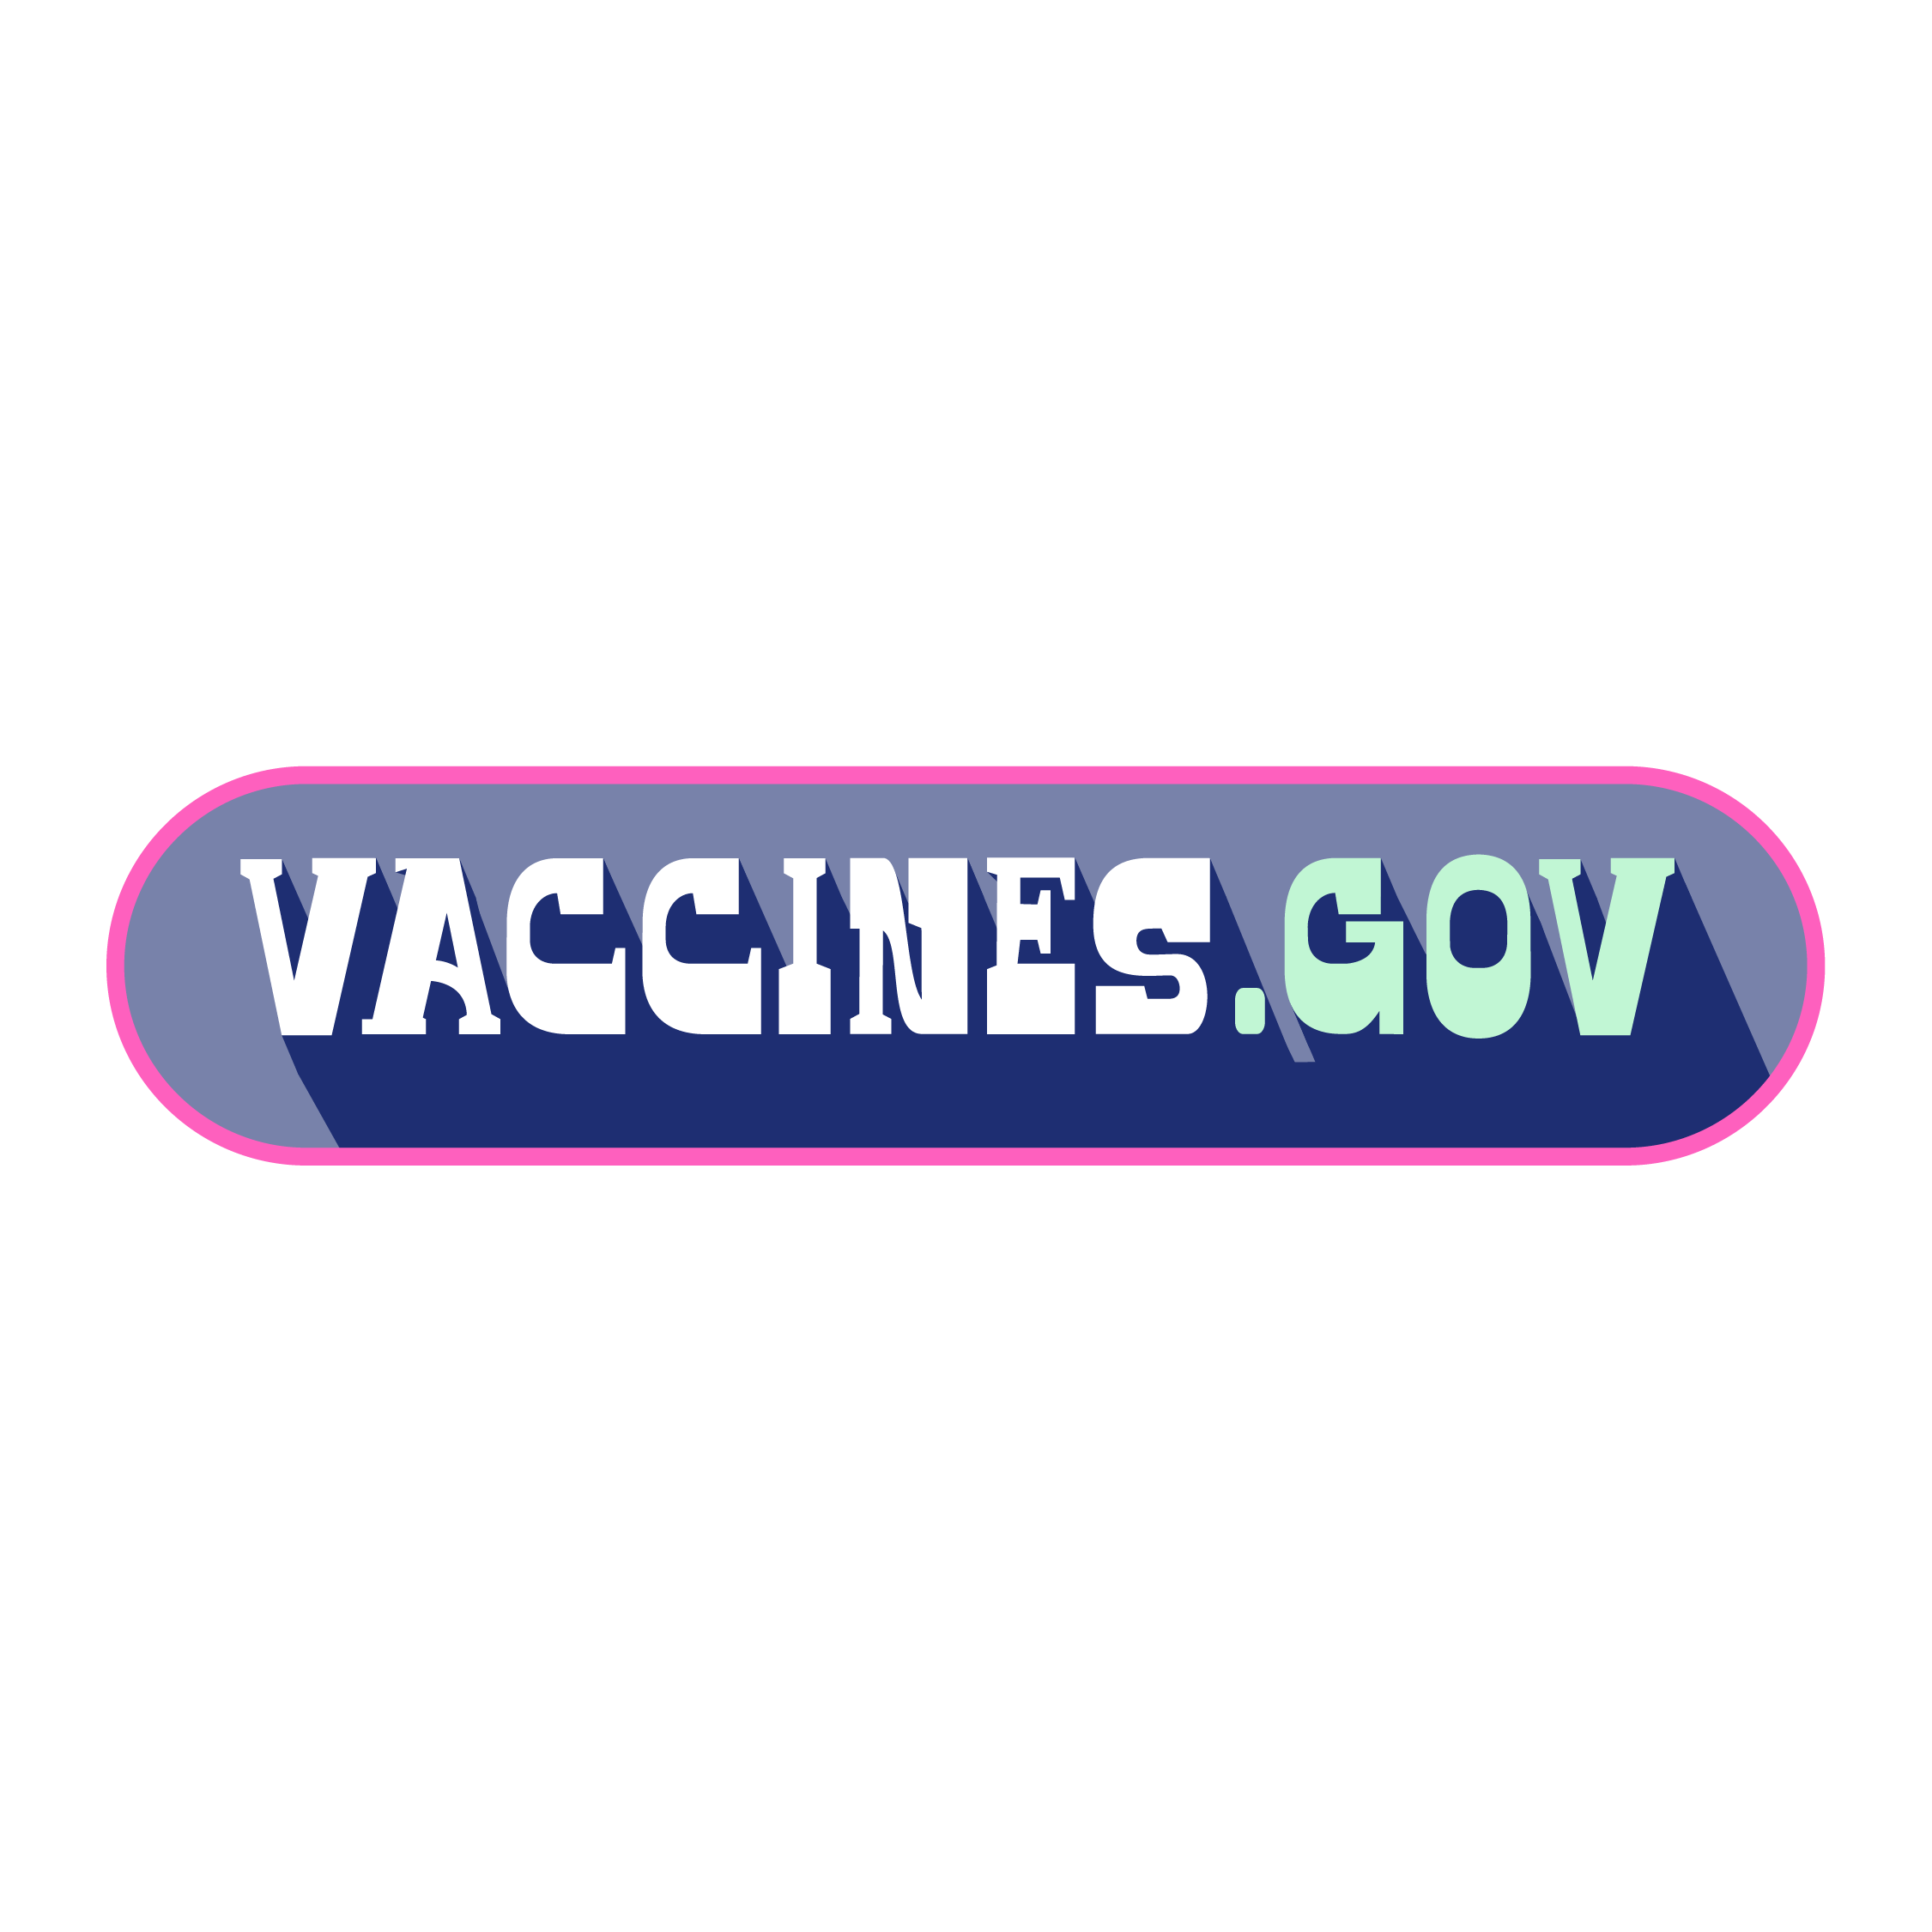 Illustrated lettering that reads "Vaccines.gov"